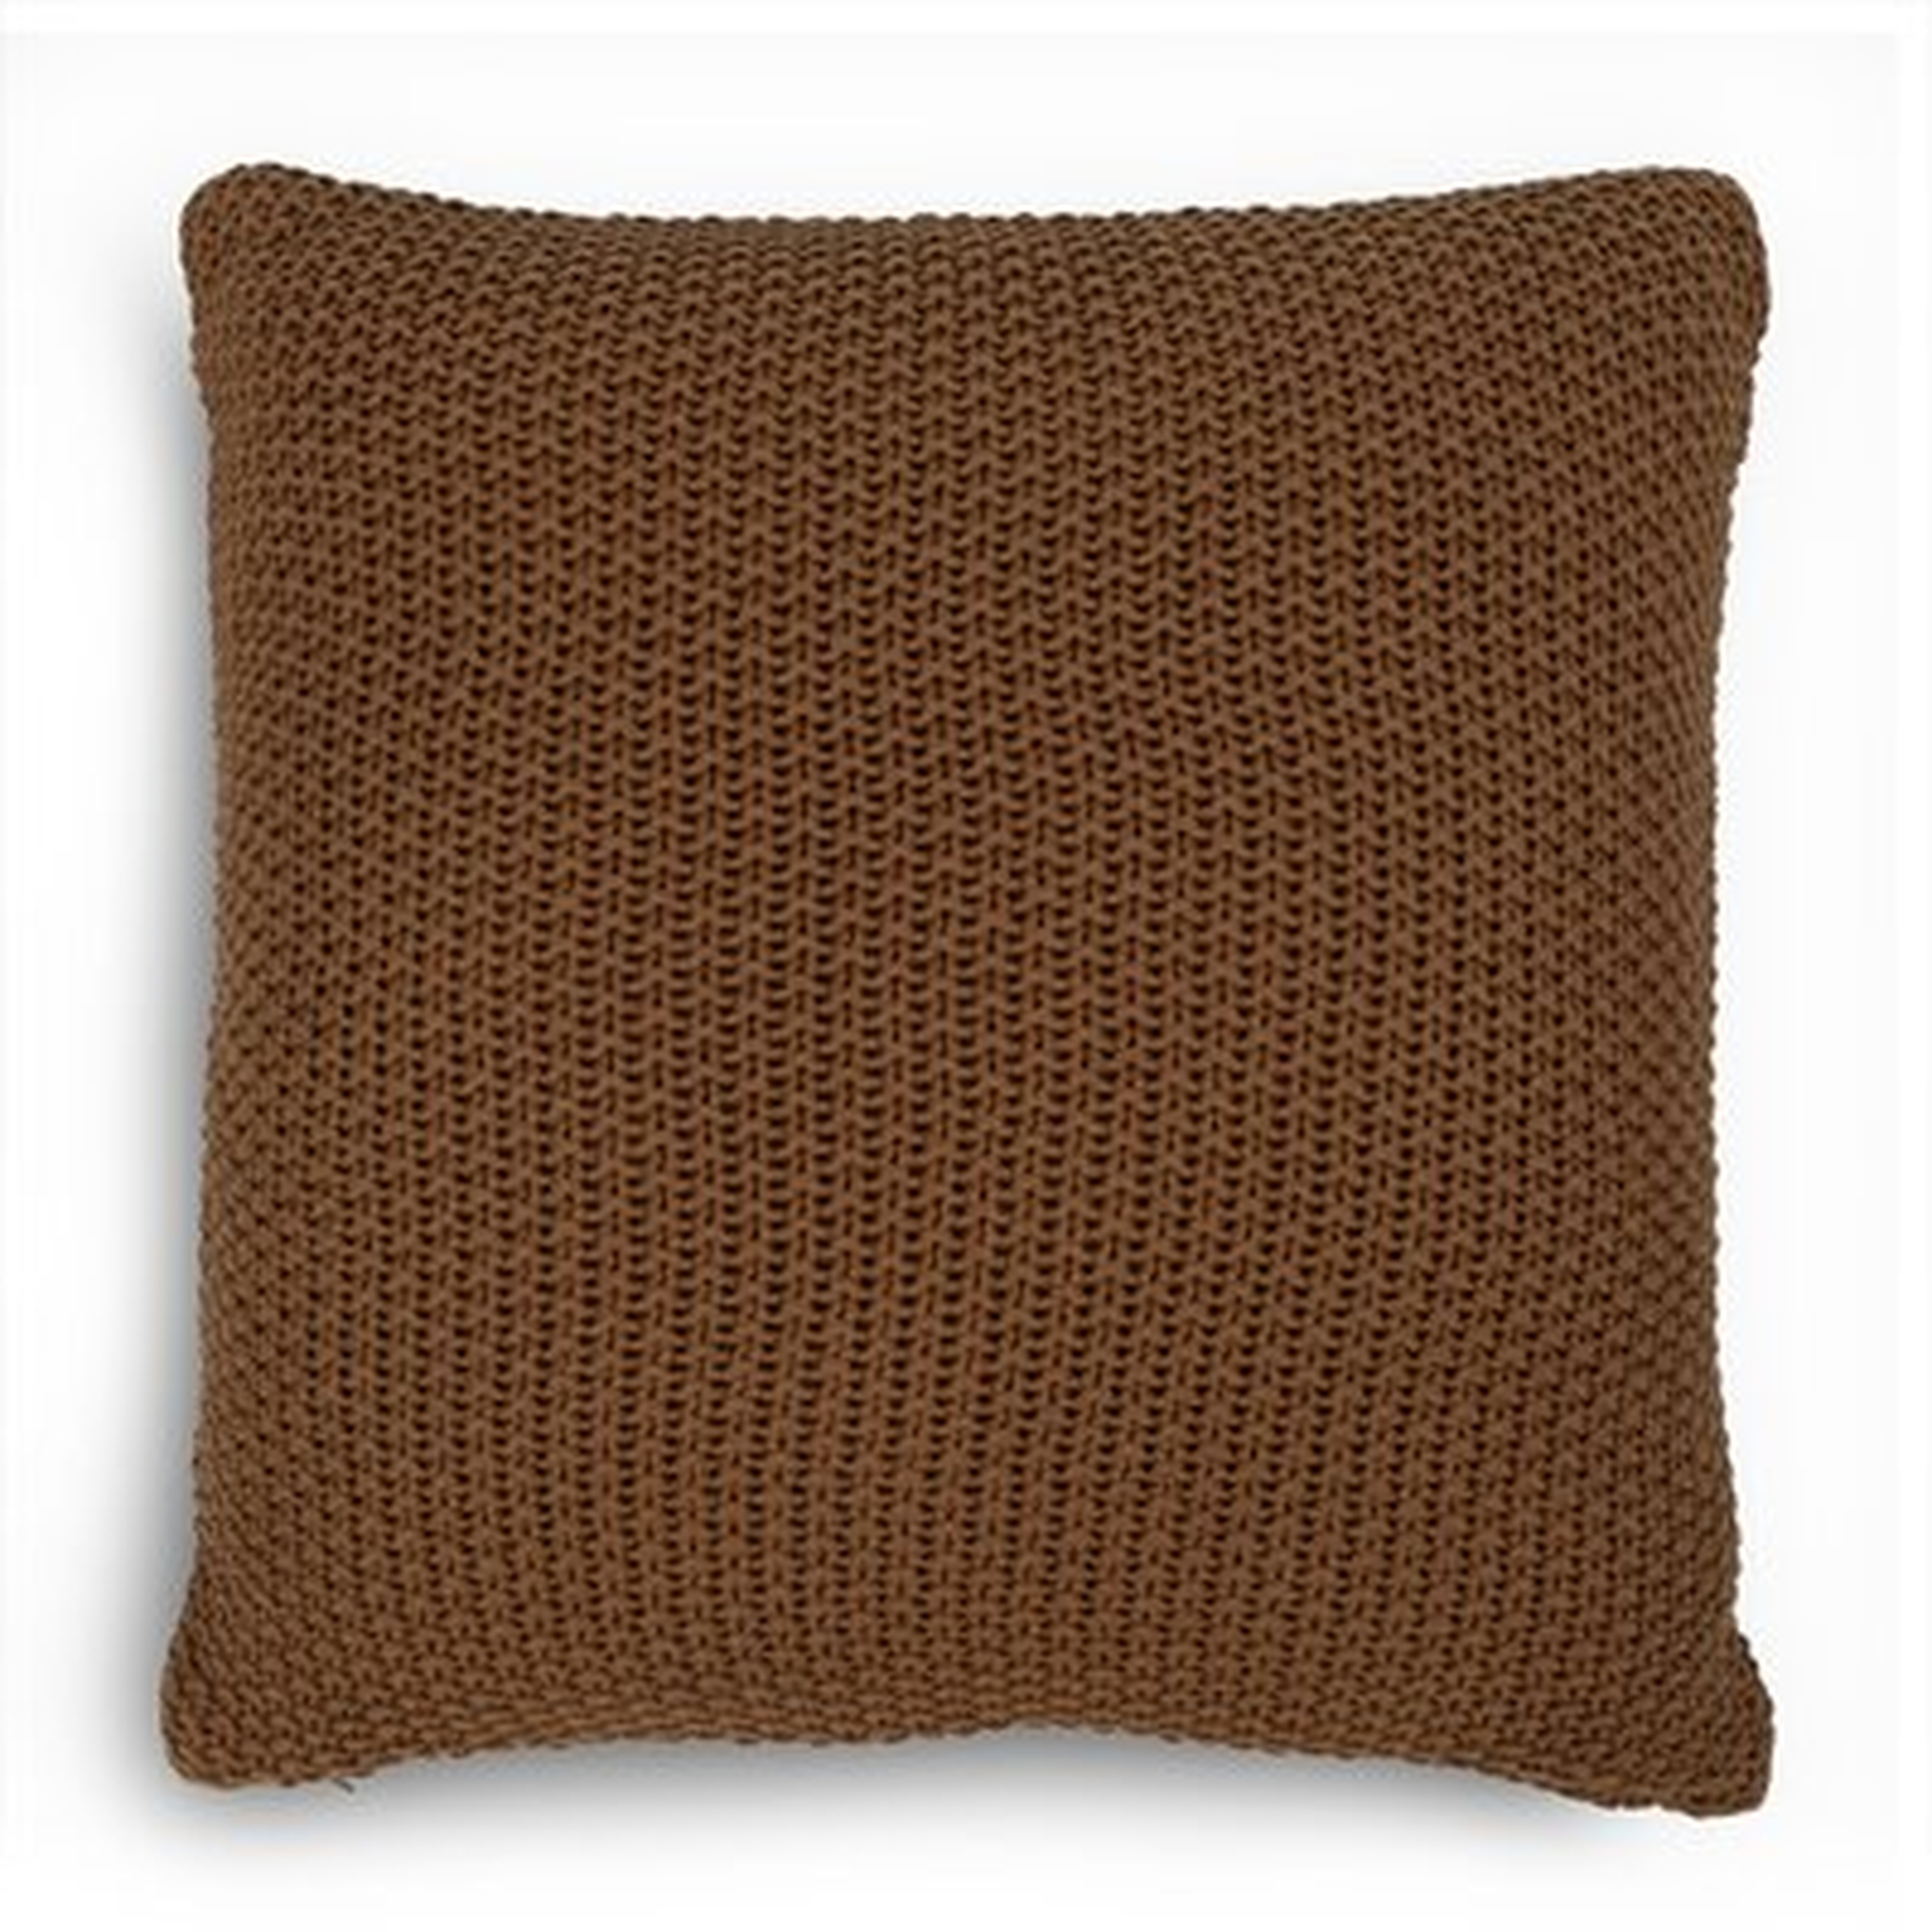 Belger Square Cotton Pillow Cover and Insert - Wayfair